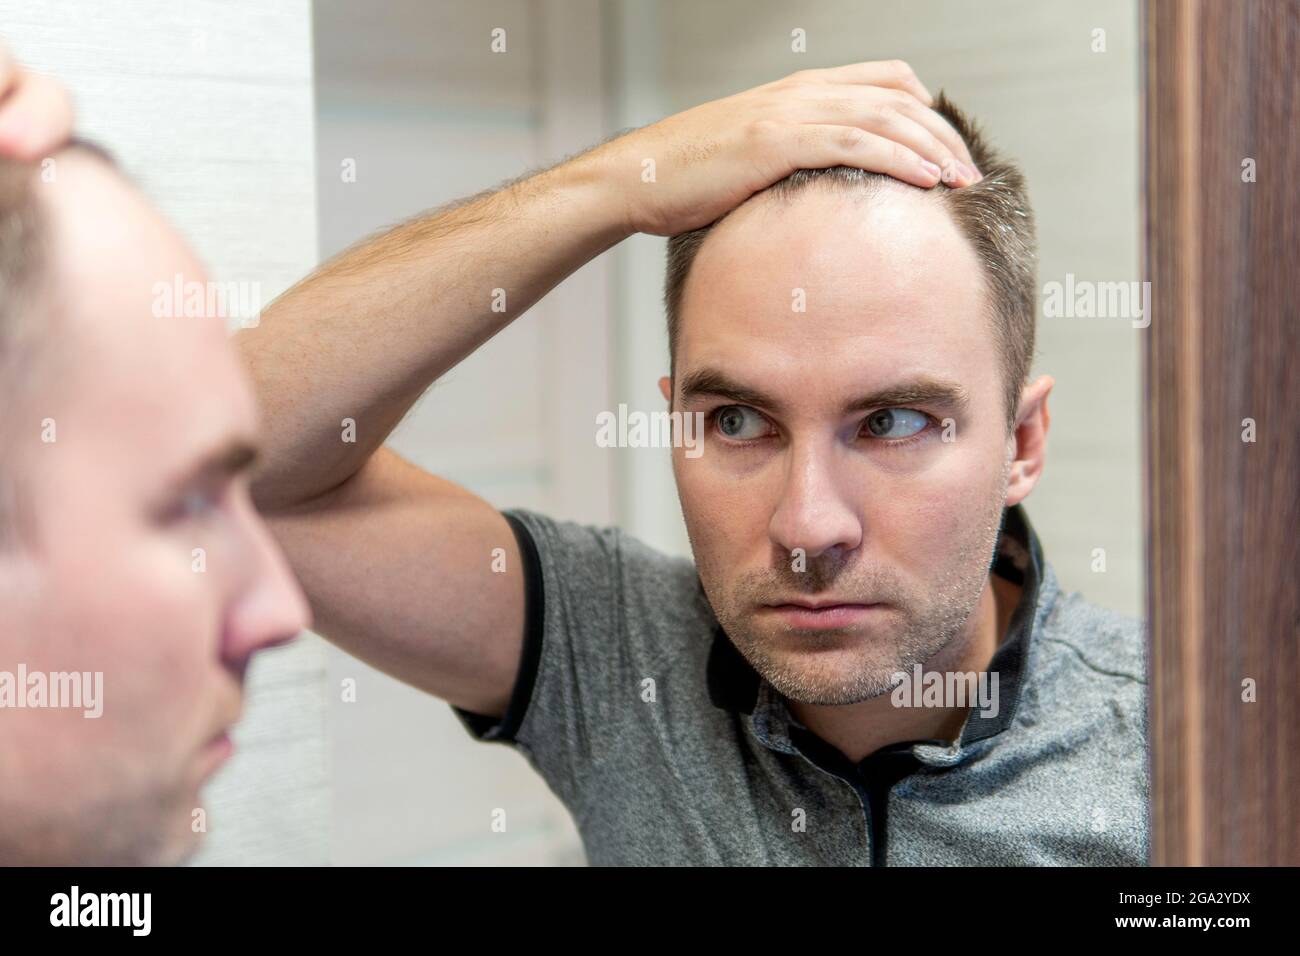 Portrait of a man looking in the mirror Stock Photo